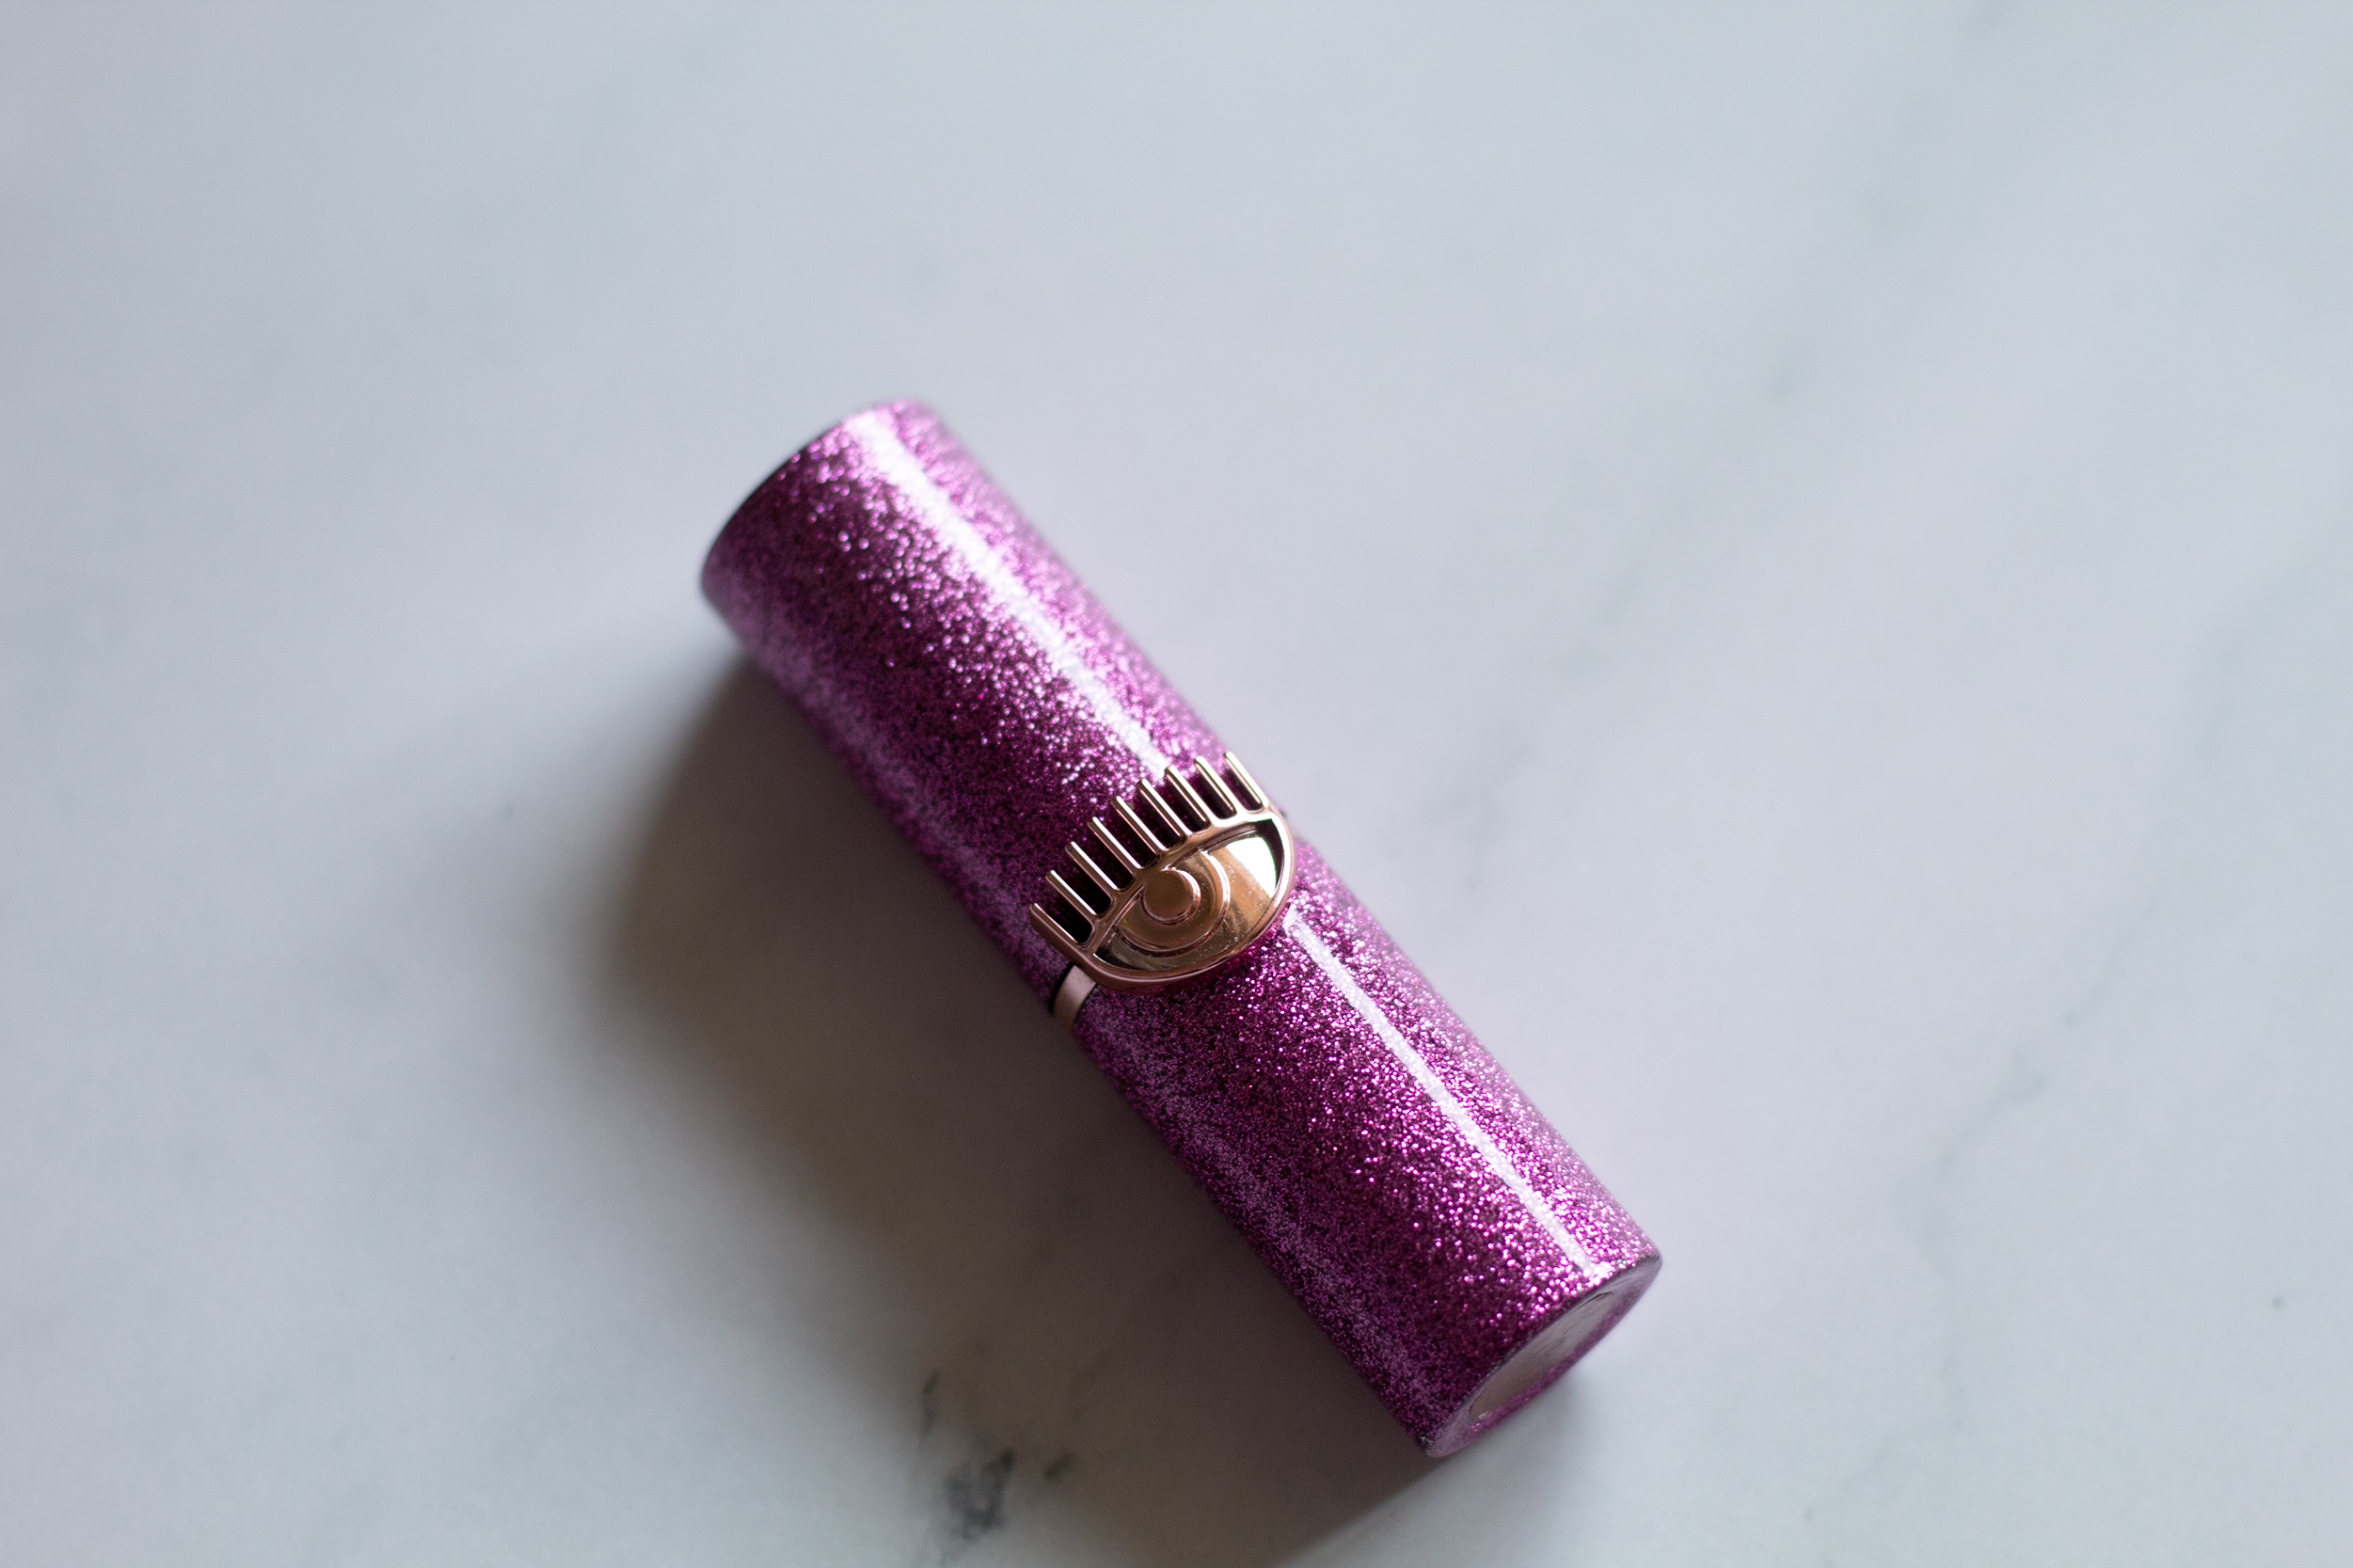 A purple sparkly lipstick rube with a gold eye icon in the middle against a white marble background